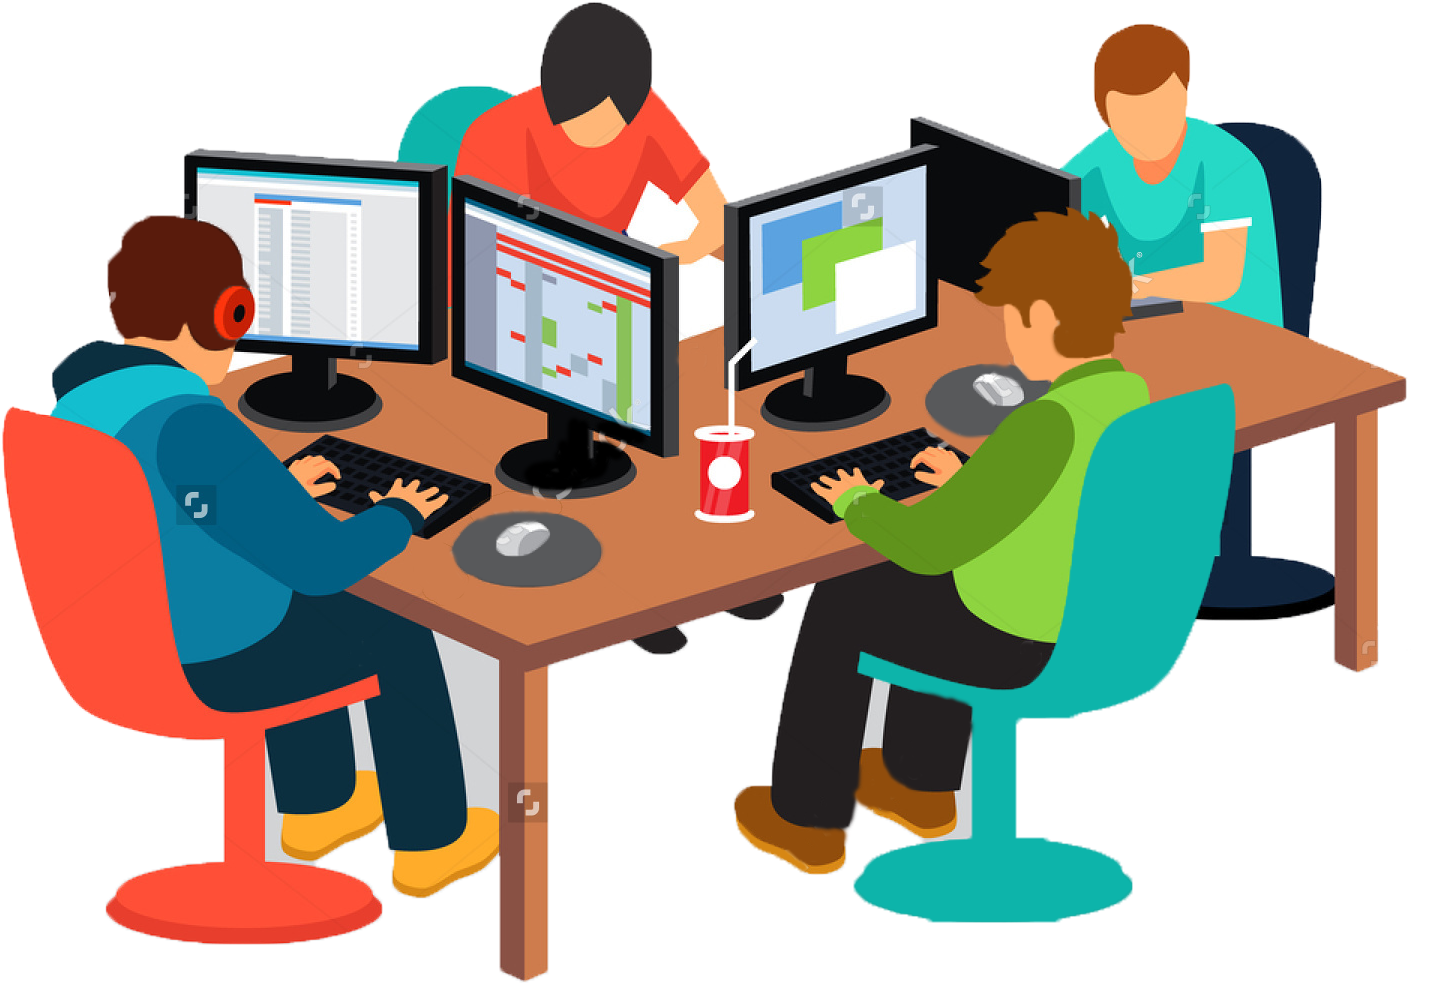 Download and share clipart about Spport - Co Located Agile Team, Find more ...